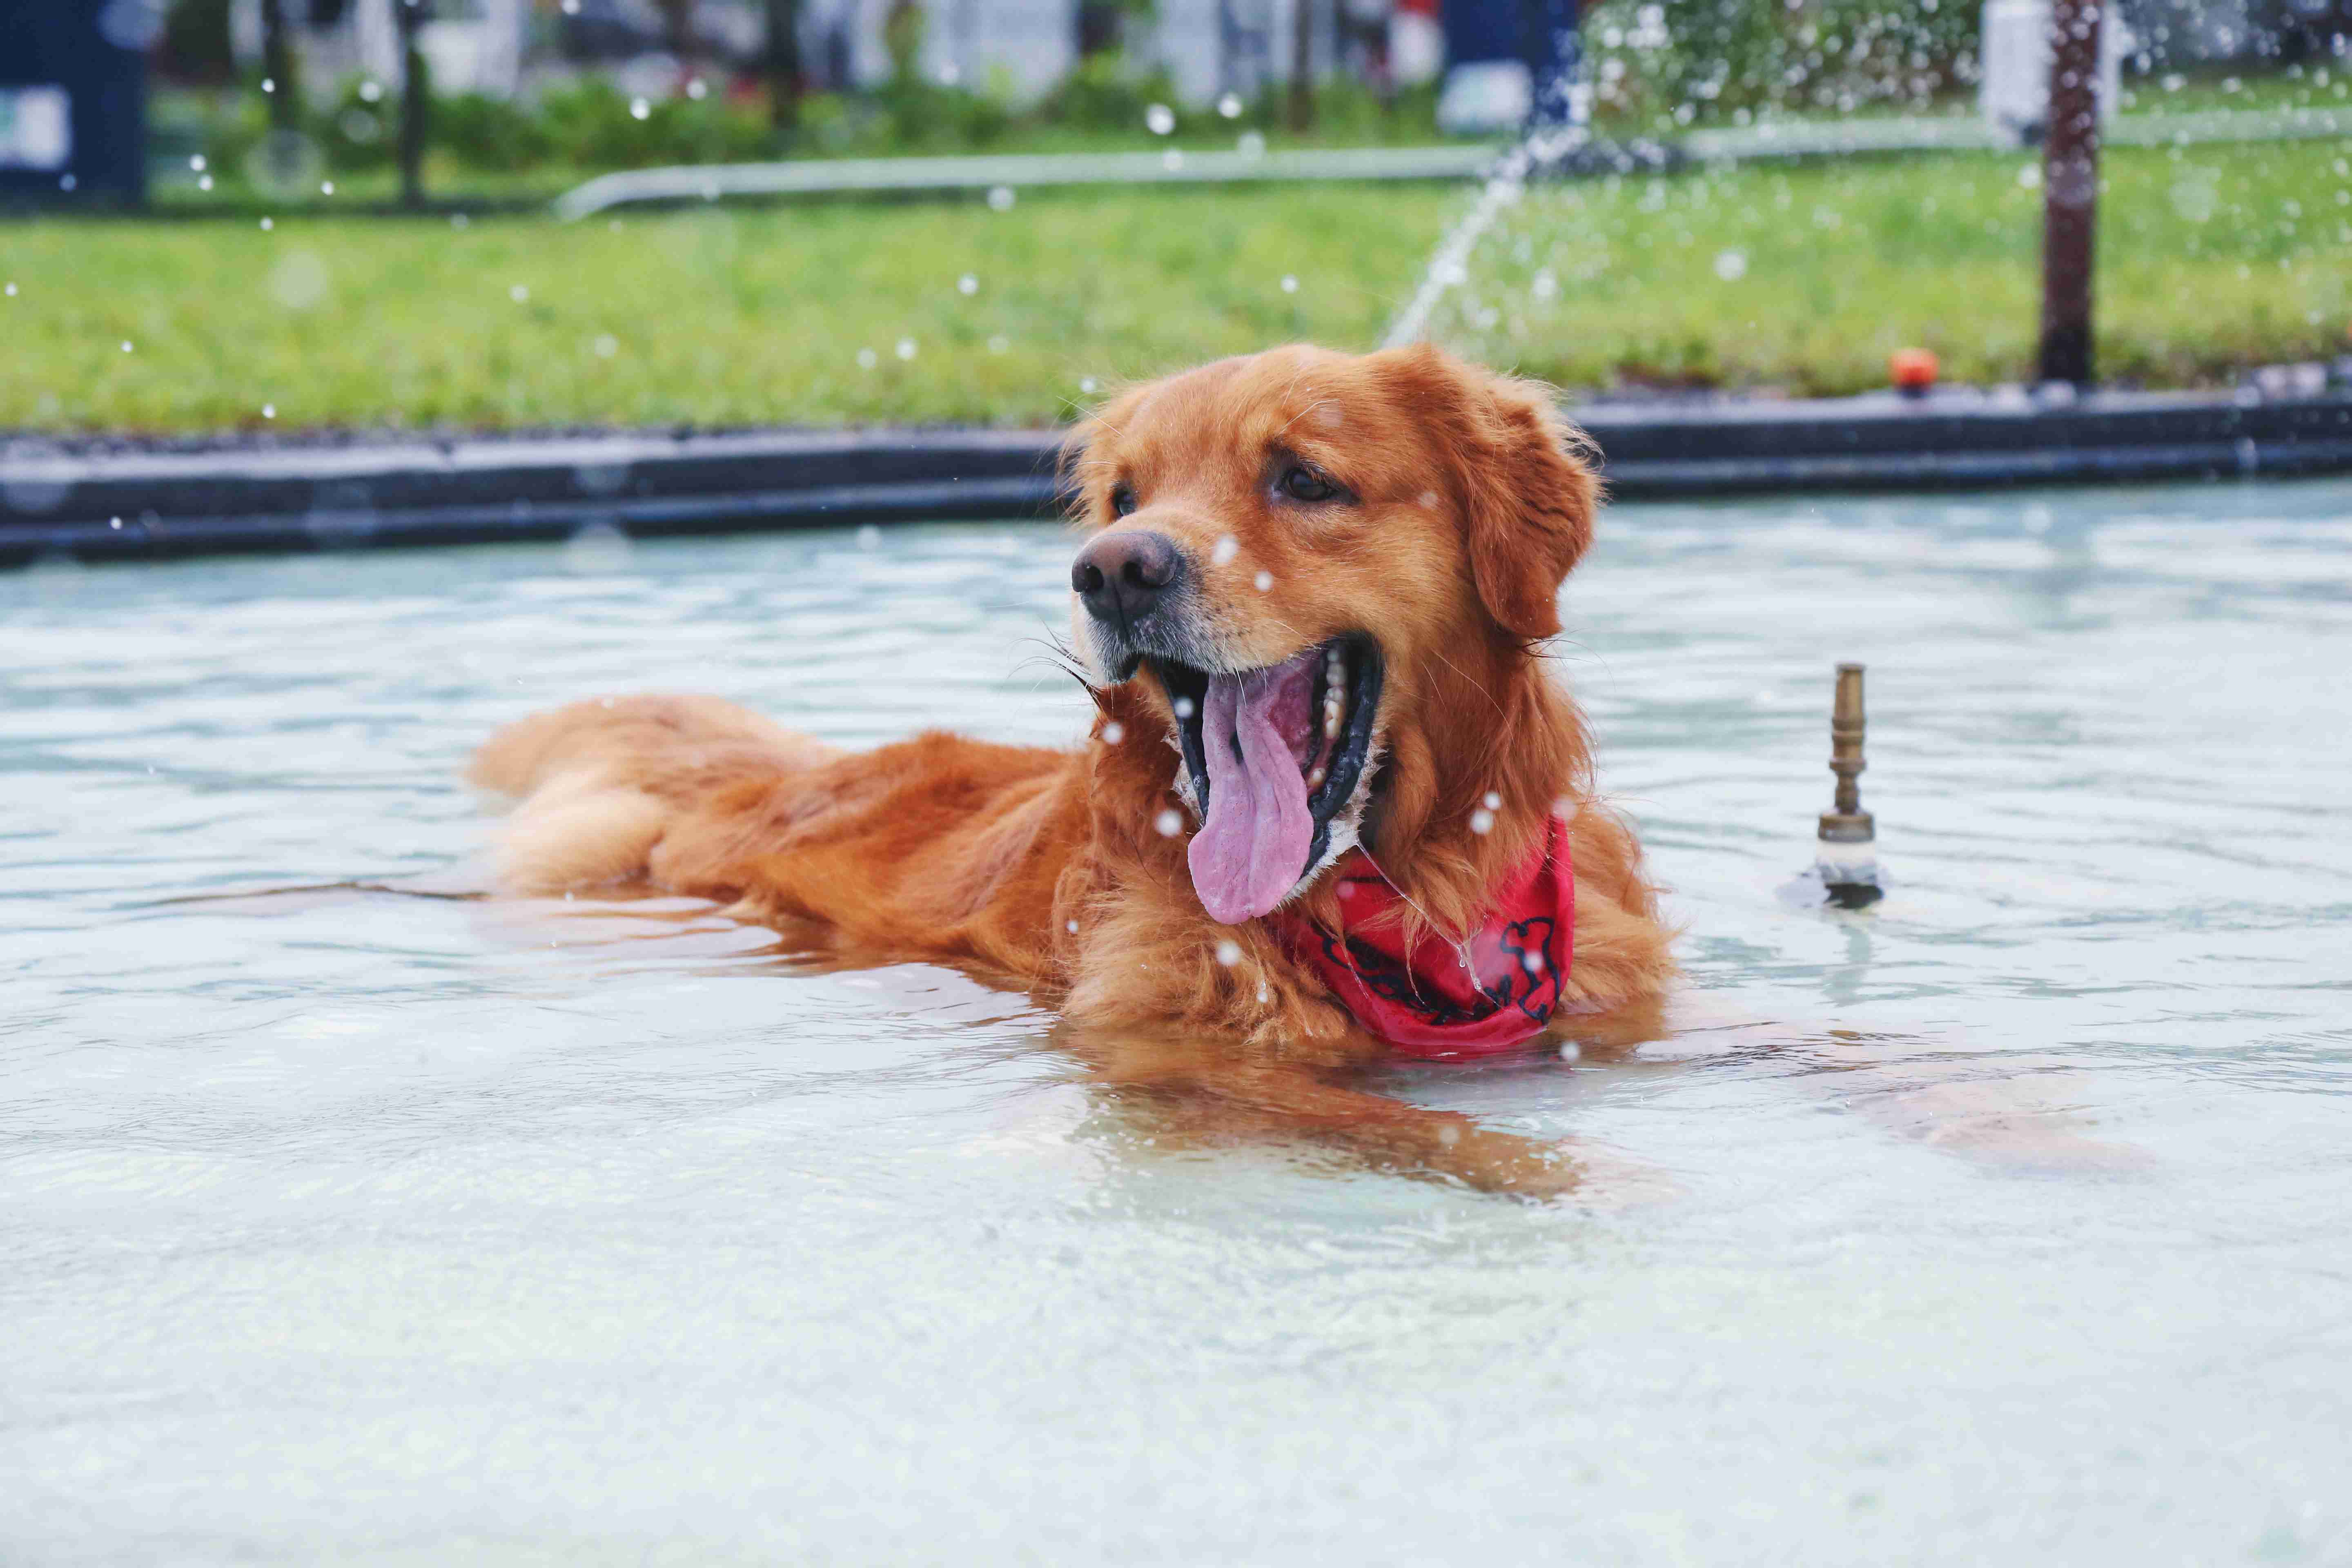 Can Golden Retrievers be trained to be off-leash?